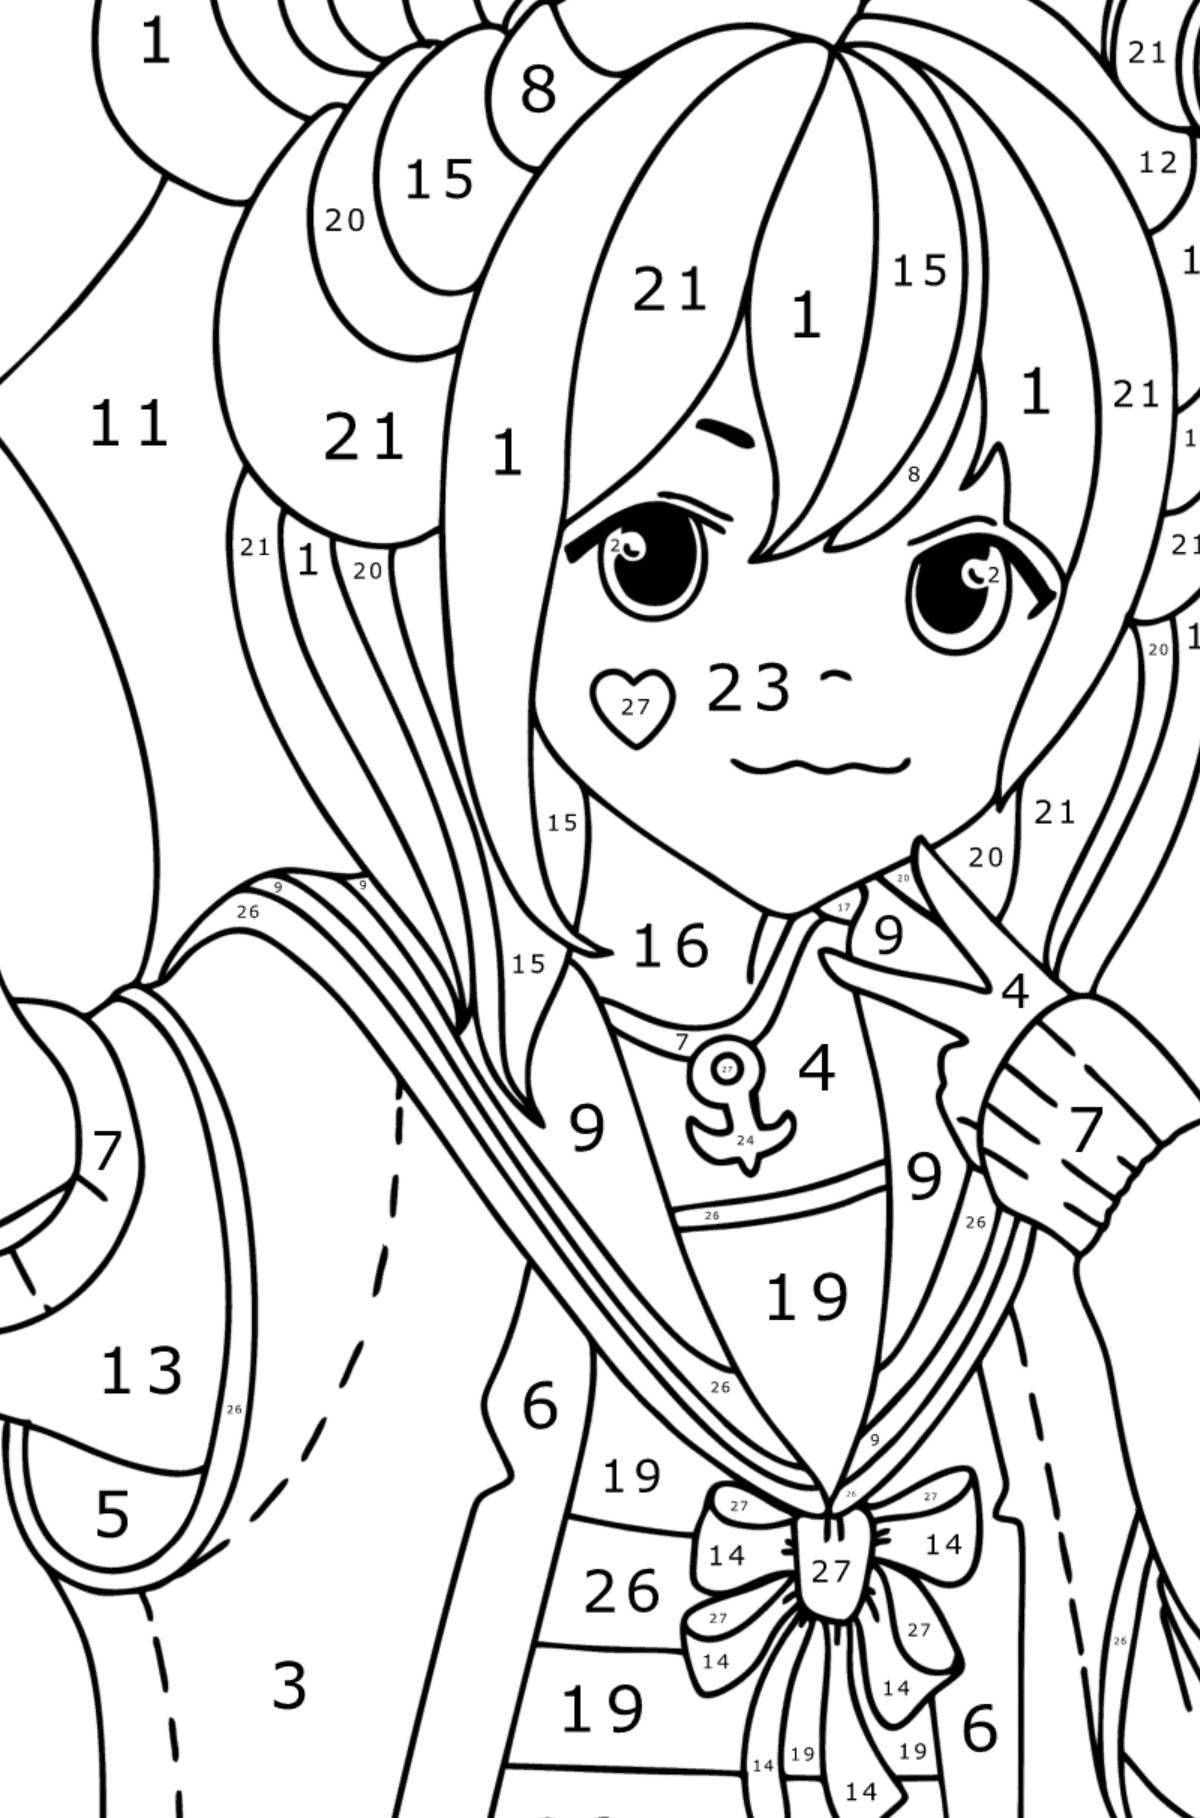 Colorful anime coloring game by numbers